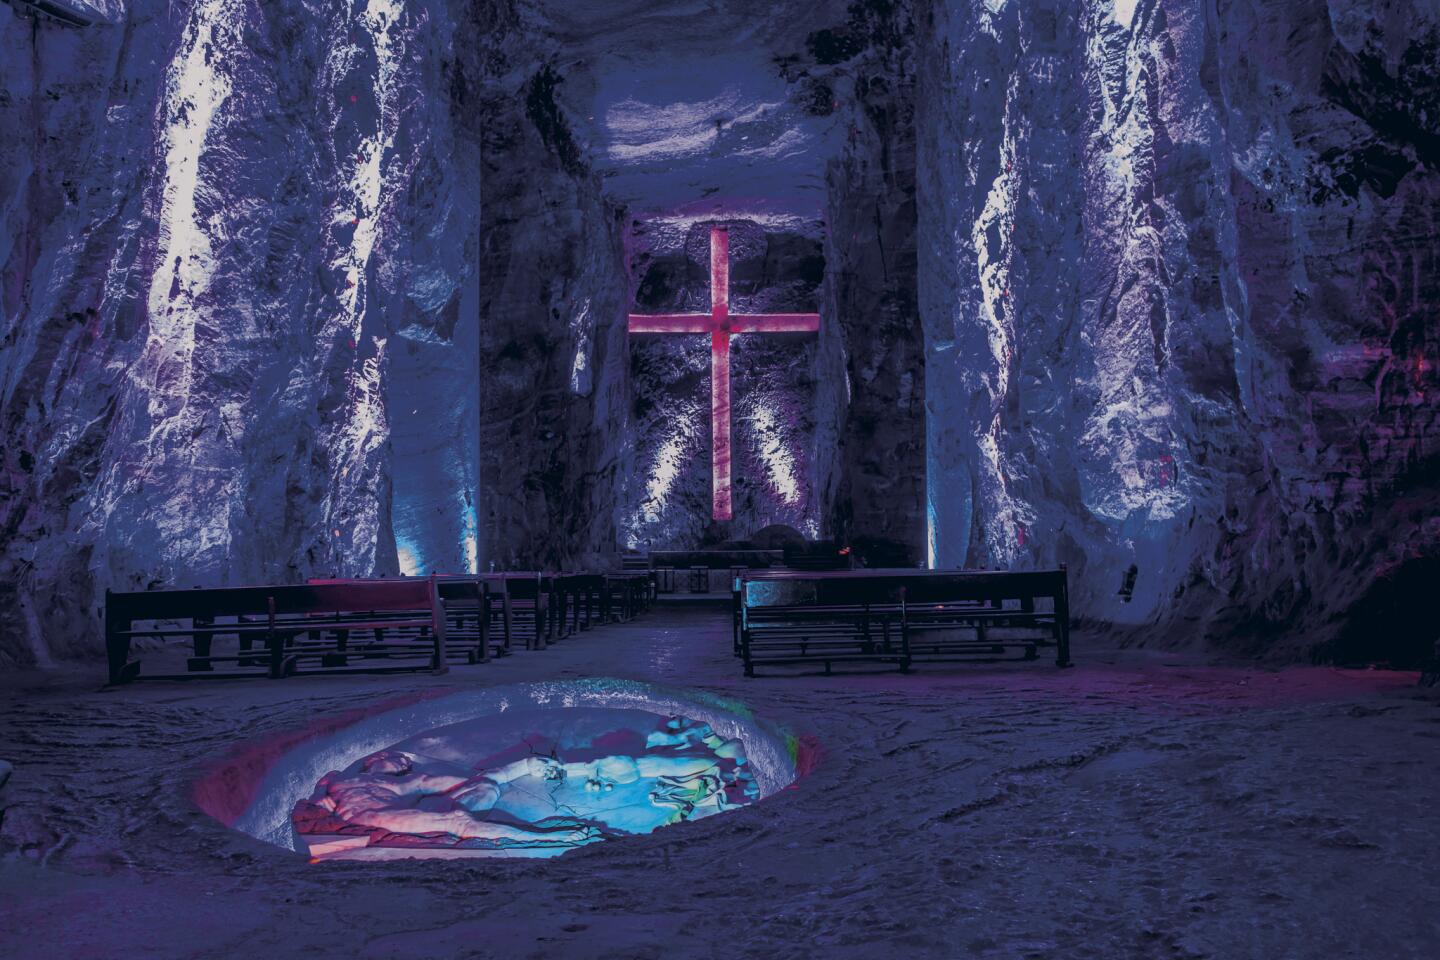 Colombia’s salt cathedral, one of only three in the world, is a house of worship carved from 250,000 tons of salt. Ambling along the 14 small chapels – each representing a Station of the Cross from Jesus’ final journey – is an amazing passage through exquisite religious symbolism and mining triumph. Don't forget to check out the central nave (the world’s largest underground church) where a mammoth cross, lit from head to toe, casts an unforgettable, ethereal glow.